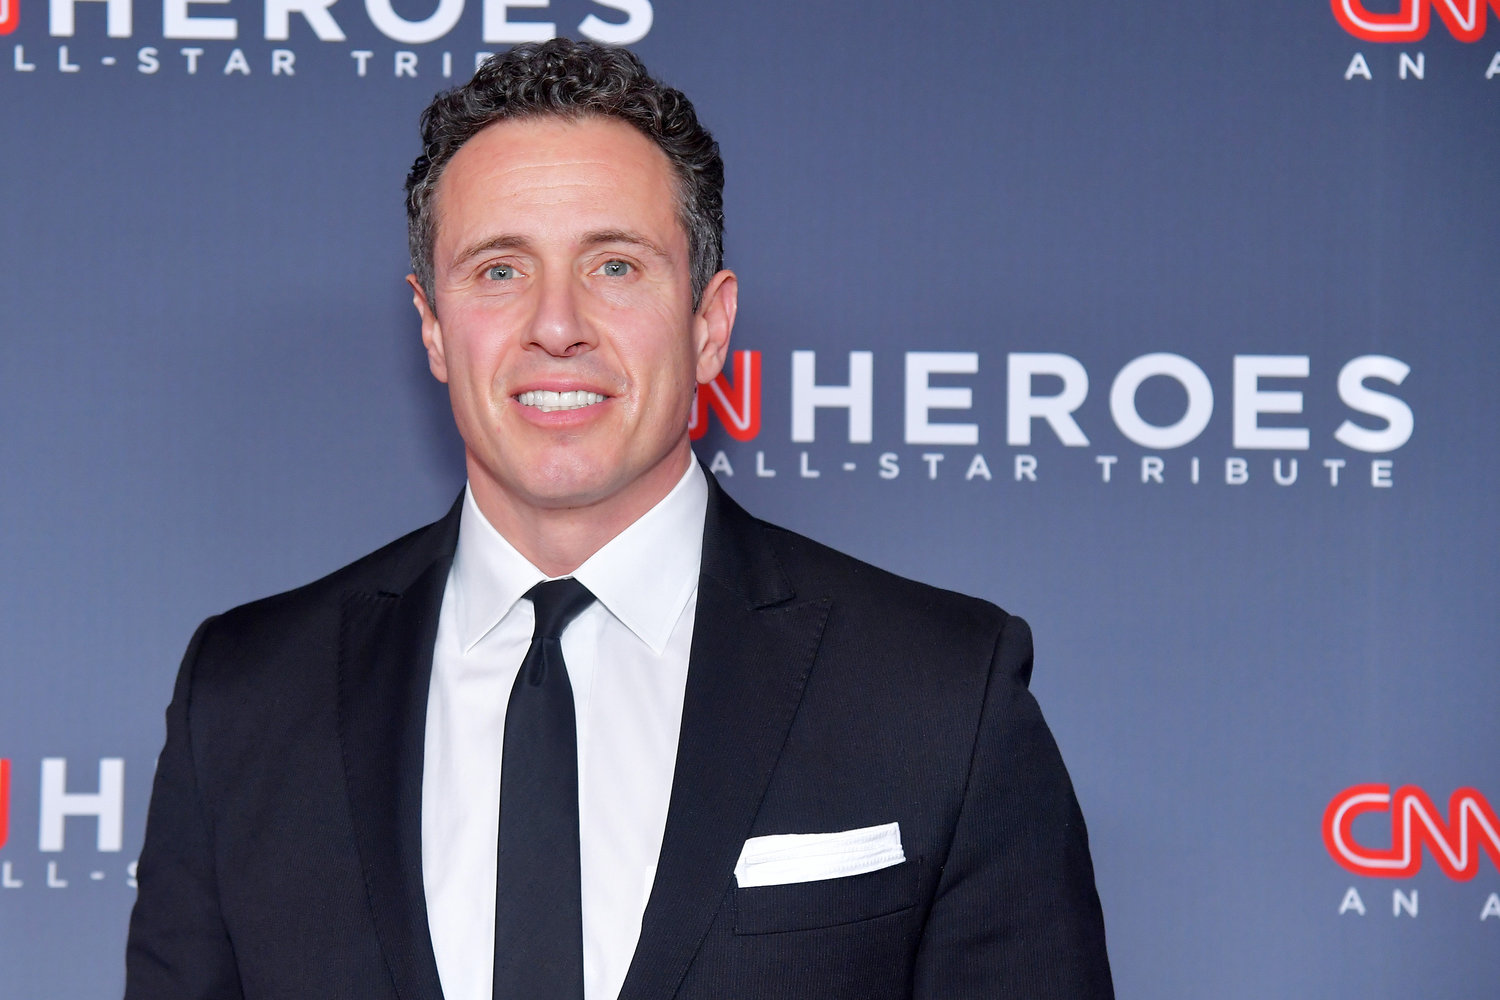 Chris Cuomo attends the 12th Annual CNN Heroes: An All-Star Tribute at American Museum of Natural History on Dec. 9, 2018, in New York City. (Michael Loccisano/Getty Images for CNN/TNS)